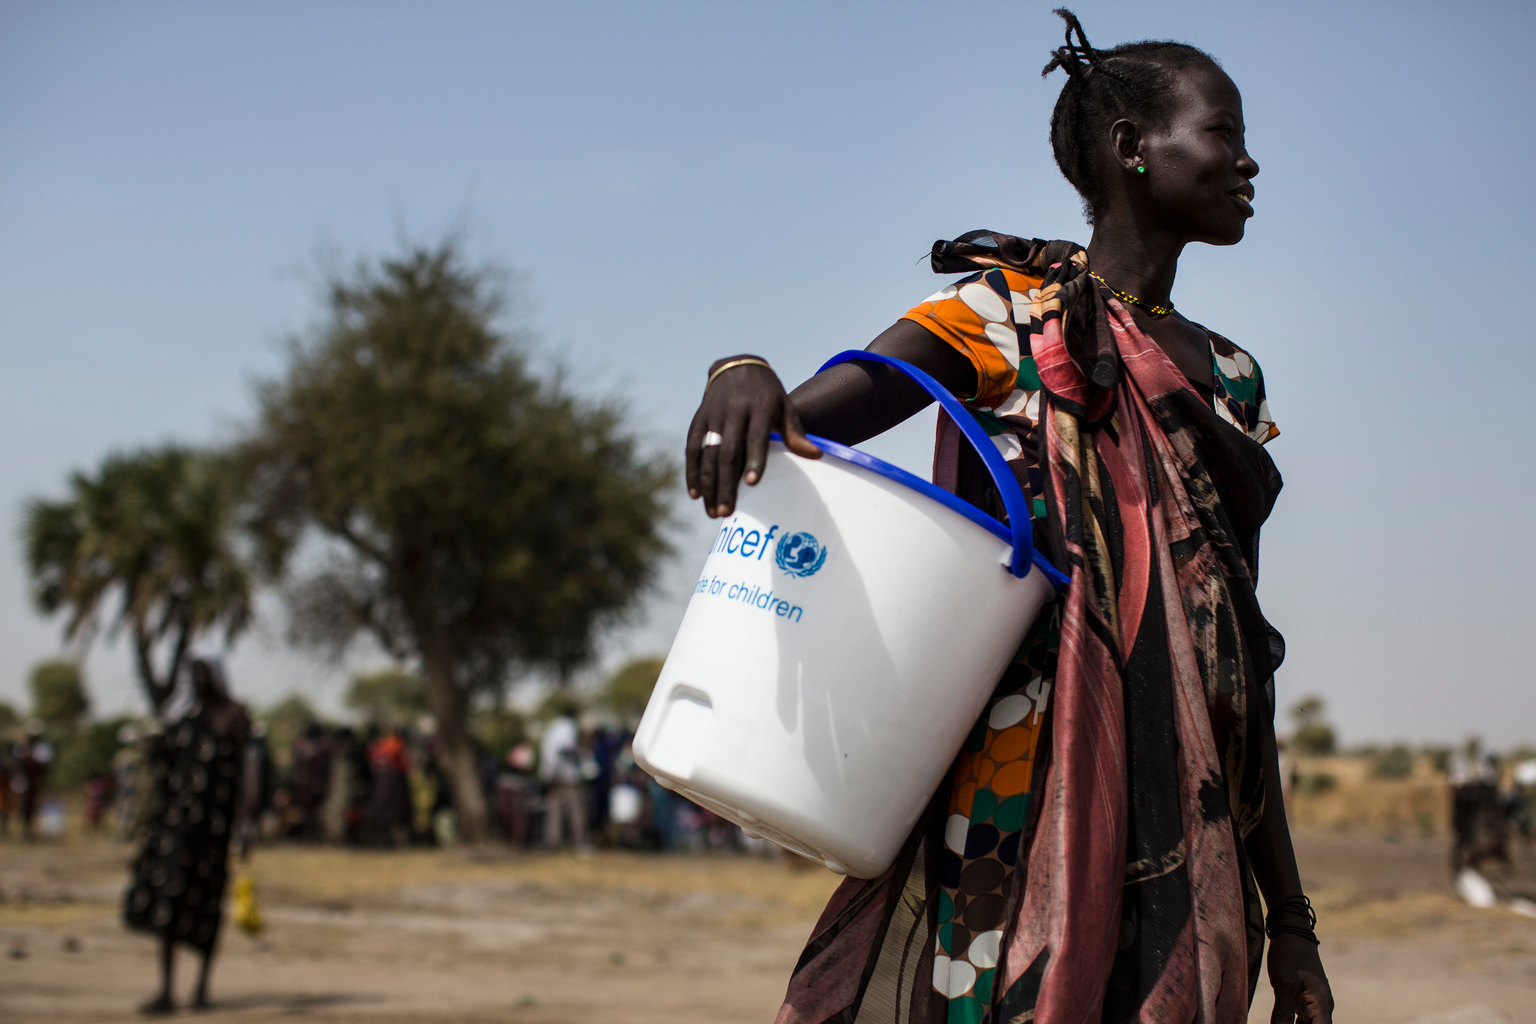 A woman holds a UNICEF donated bucket during a Rapid Response Mission (RRM) in the village of Rubkuai, Unity State, South Sudan, Feuary 16, 2017. In 2017 in South Sudan, ongoing insecurity, combined with an economic crisis that has pushed inflation above 800 percent, has created widespread food insecurity with malnutrition among children having reached emergency levels in most parts of the country. In 2016, UNICEF and partners admitted 184,000 children for treatment of severe malnutrition. That is 50 percent higher than the number treated in 2015 and an increase of 135 percent over 2014. In Feuary 2017, war and a collapsing economy have left some 100,000 people facing starvation in parts of South Sudan where famine was declared 20 Feuary, three UN agencies warned. A further 1 million people are classified as being on the ink of famine. The Food and Agriculture Organization of the United Nations (FAO), the United Nations Children’s Fund (UNICEF) and the World Food Programme (WFP) also warned that urgent action is needed to prevent more people from dying of hunger. If sustained and adequate assistance is delivered urgently, the hunger situation can be improved in the coming months and further suffering mitigated.  The total number of food insecure people is expected to rise to 5.5 million at the height of the lean season in July if nothing is done to curb the severity and spread of the food crisis. According to the Integrated Food Security Phase Classification (IPC) update released 20 Feuary by the government, the three agencies and other humanitarian partners, 4.9 million people – more than 40 percent of South Sudan’s population – are in need of urgent food, agriculture and nutrition assistance. Unimpeded humanitarian access to everyone facing famine, or at risk of famine, is urgently needed to reverse the escalating catastrophe, the UN agencies urged. Further spread of famine can only be prevented if humanitarian assistance is scaled up and